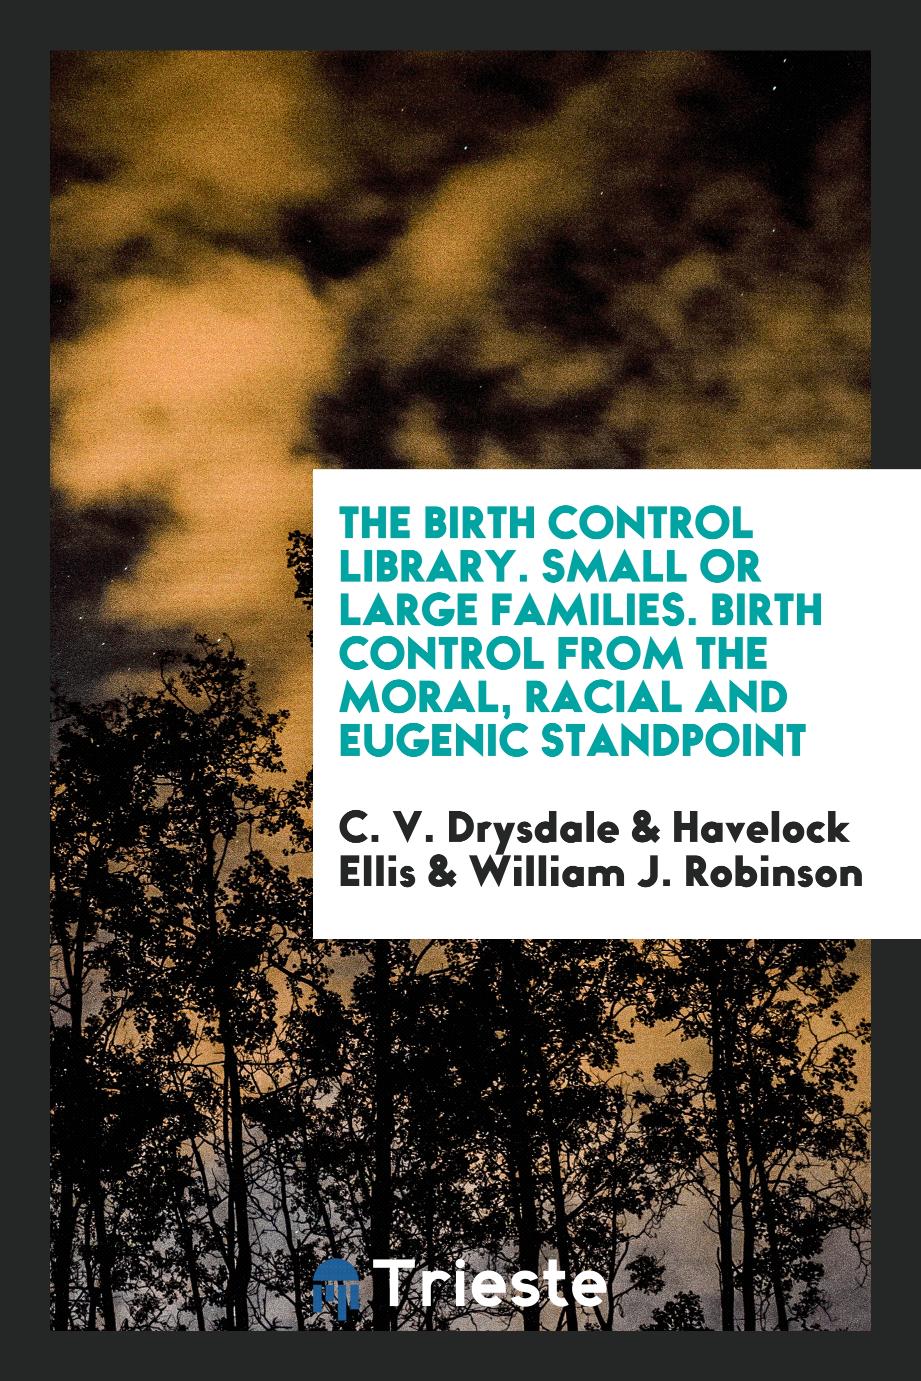 The Birth Control Library. Small or Large Families. Birth Control from the Moral, Racial and Eugenic Standpoint